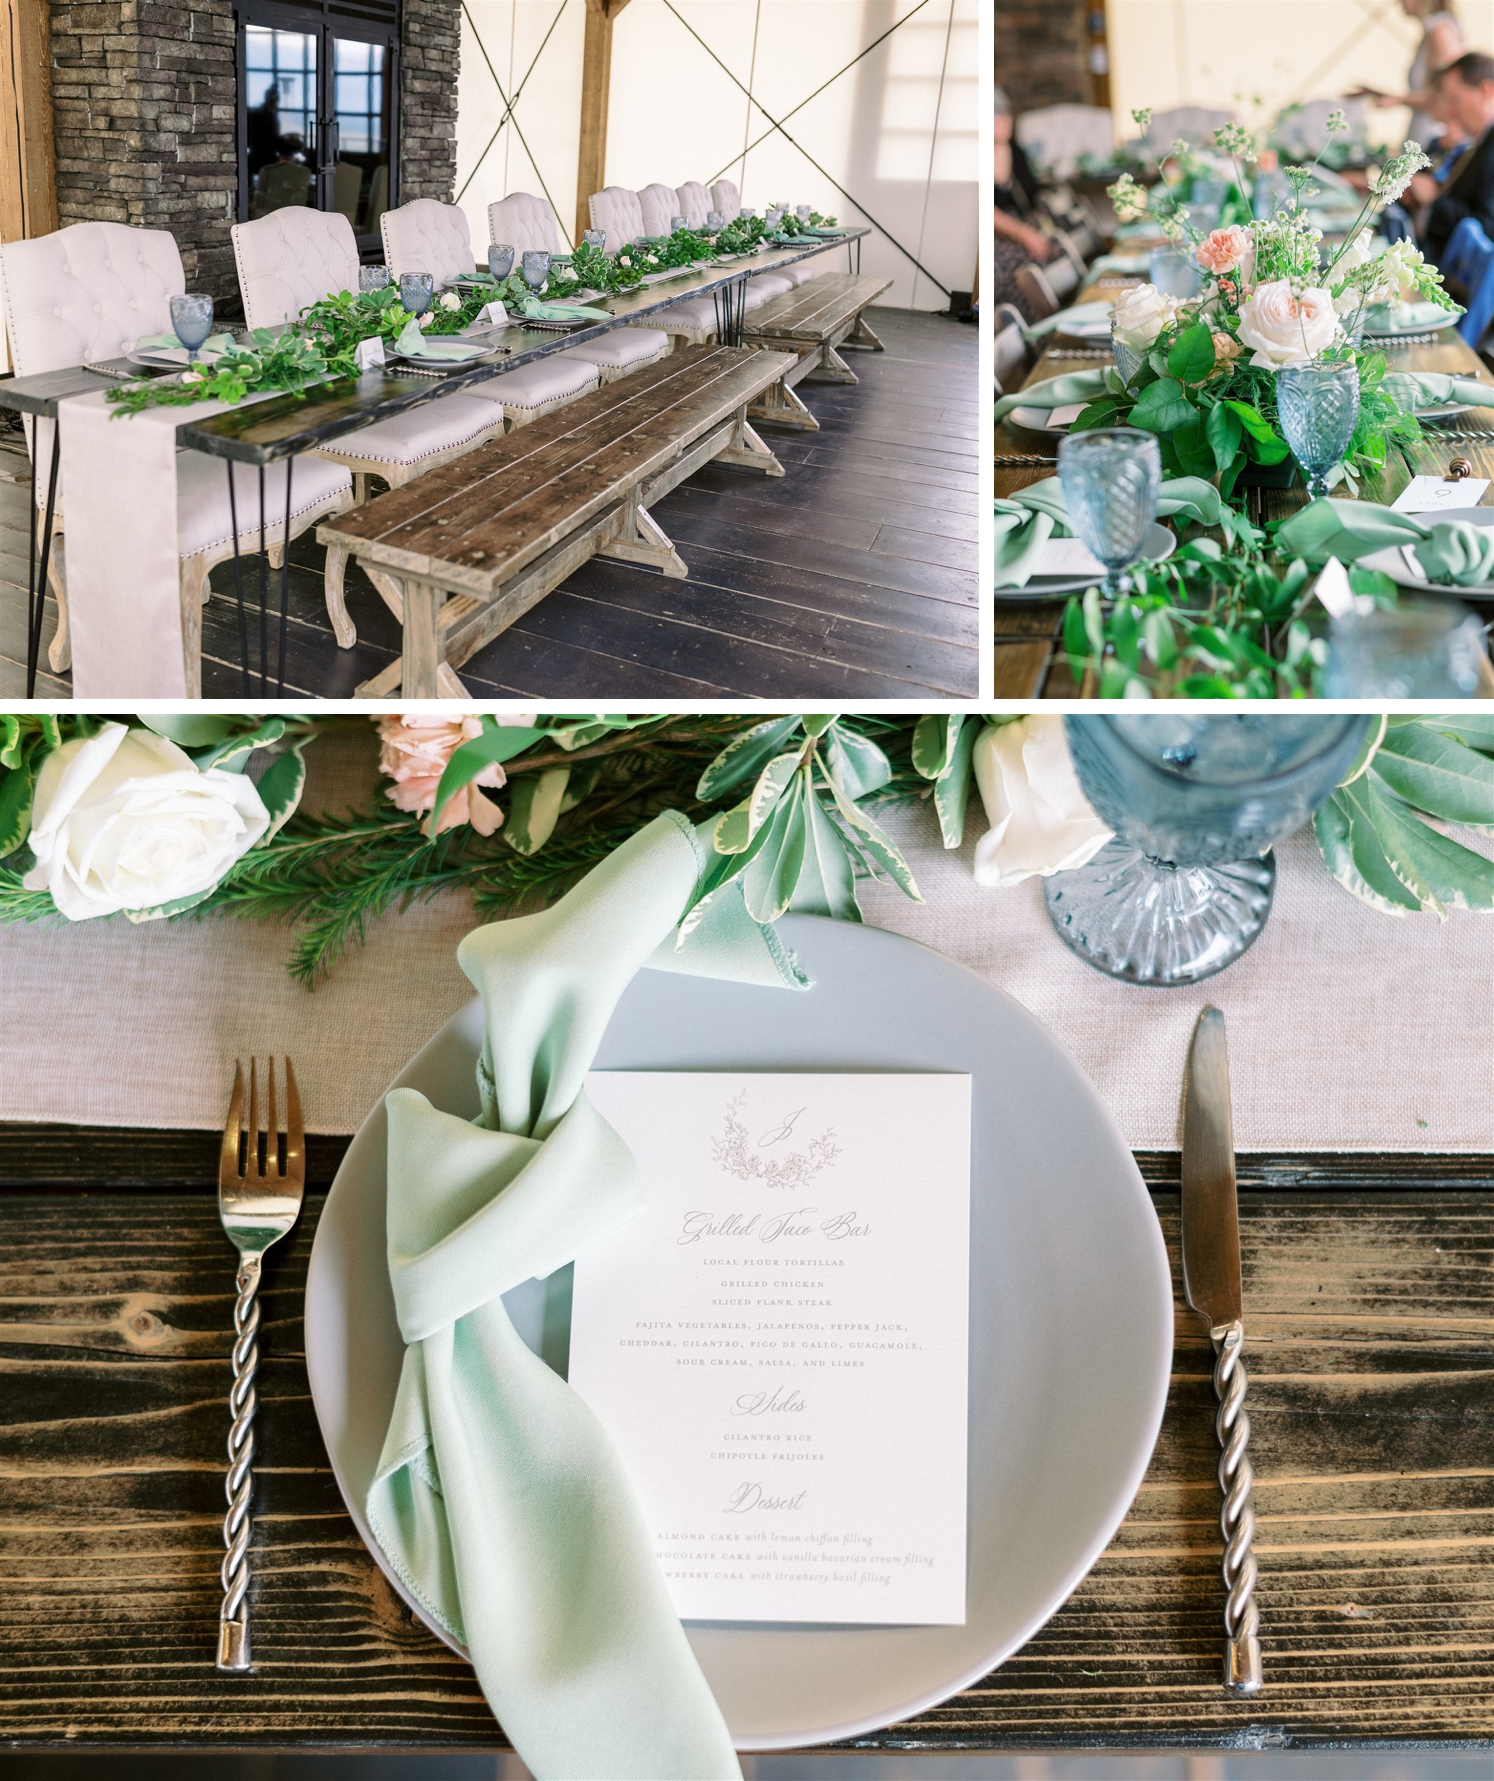 Head table with green garland runner and tufted chairs | pink and green floral arrangements with pale blue vintage glasses | table setting of light gray plate with pale green napkins and light blue vintage glass | McArthur Weddings and Events